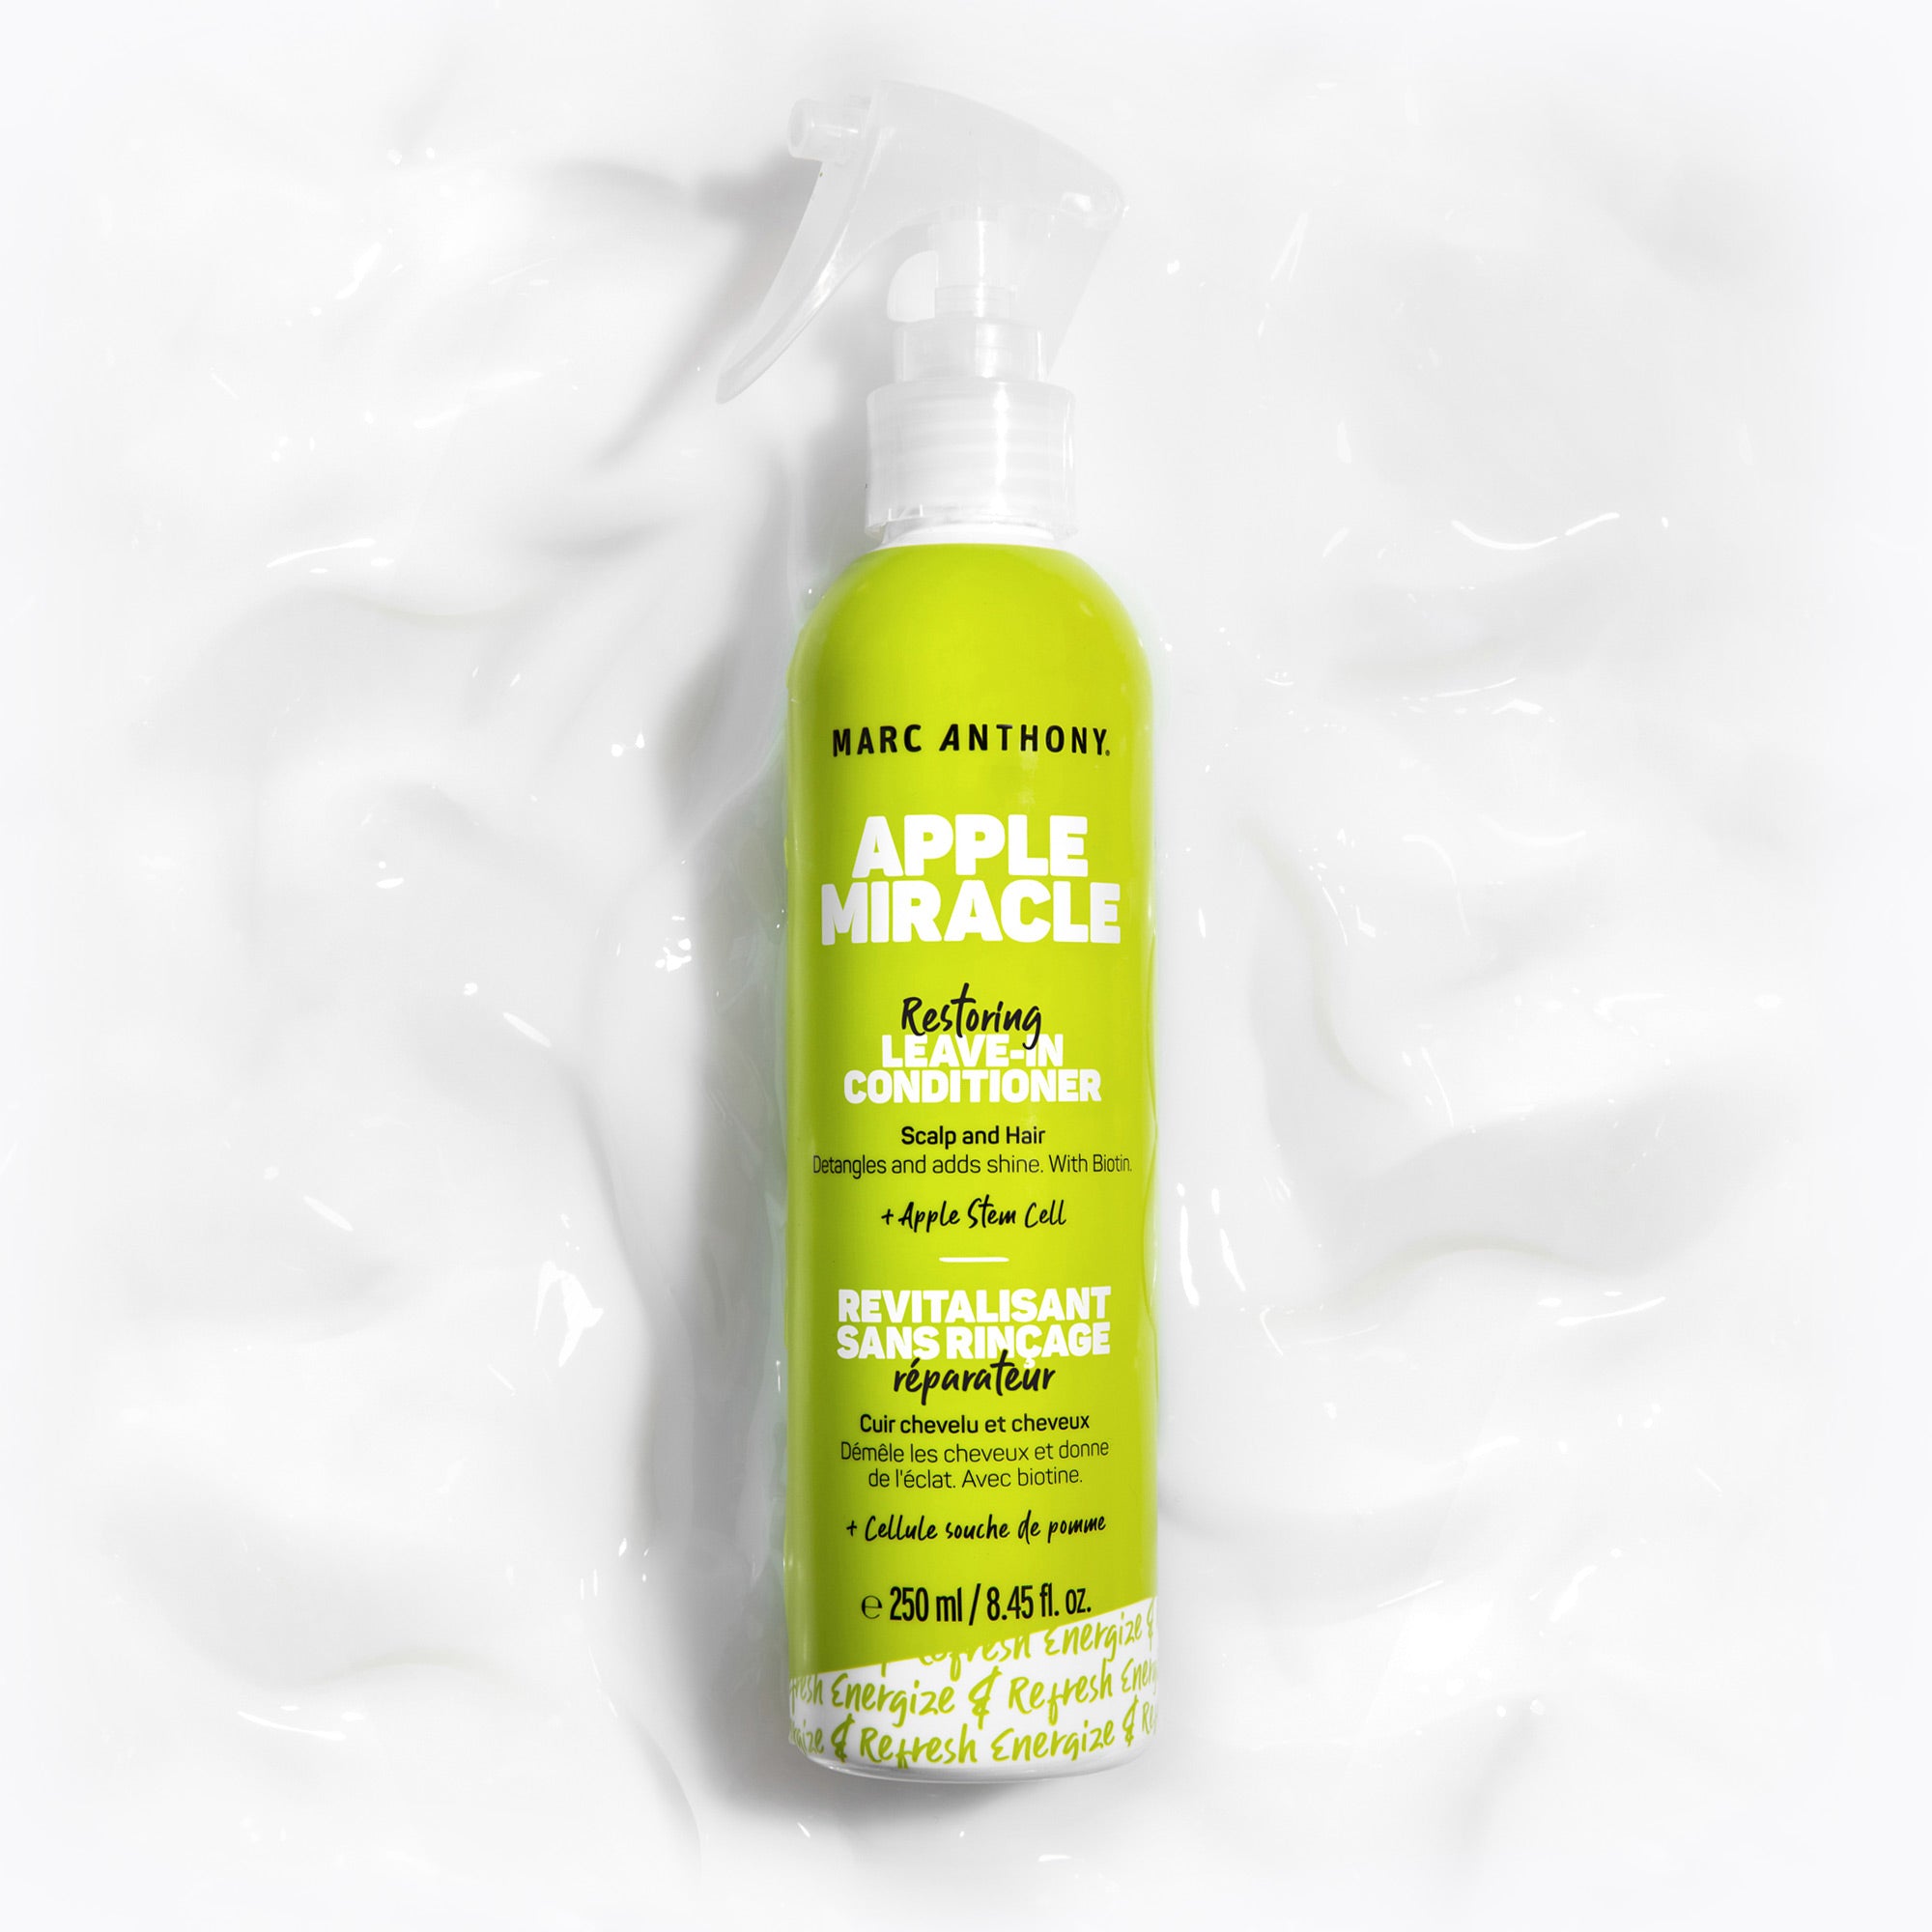 Miracle Leave-In Product